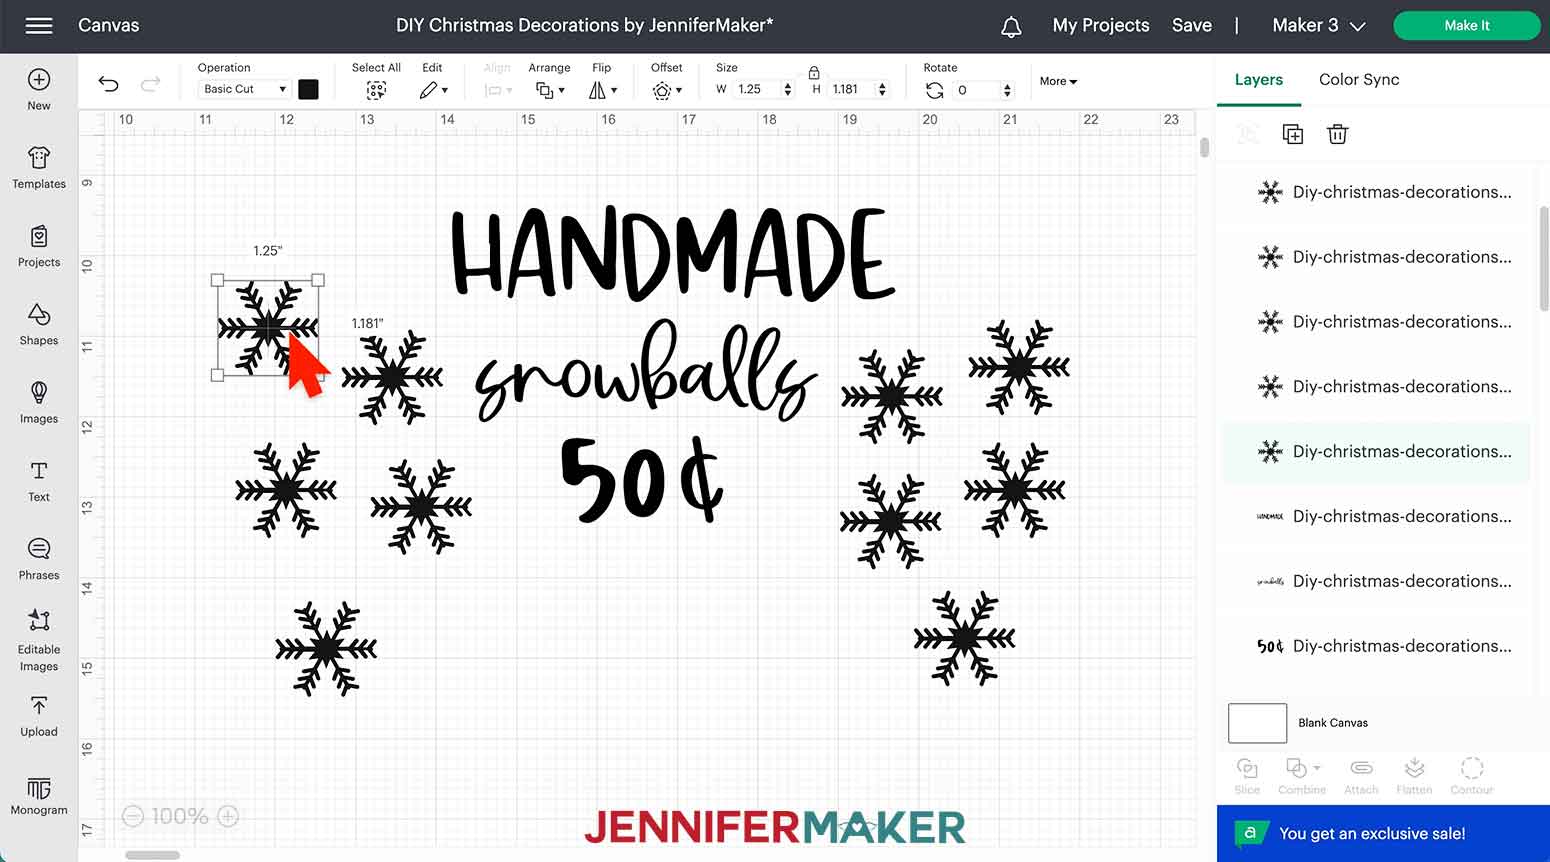 Duplicate snowflake design on Design Space canvas for snowball bucket decorations.